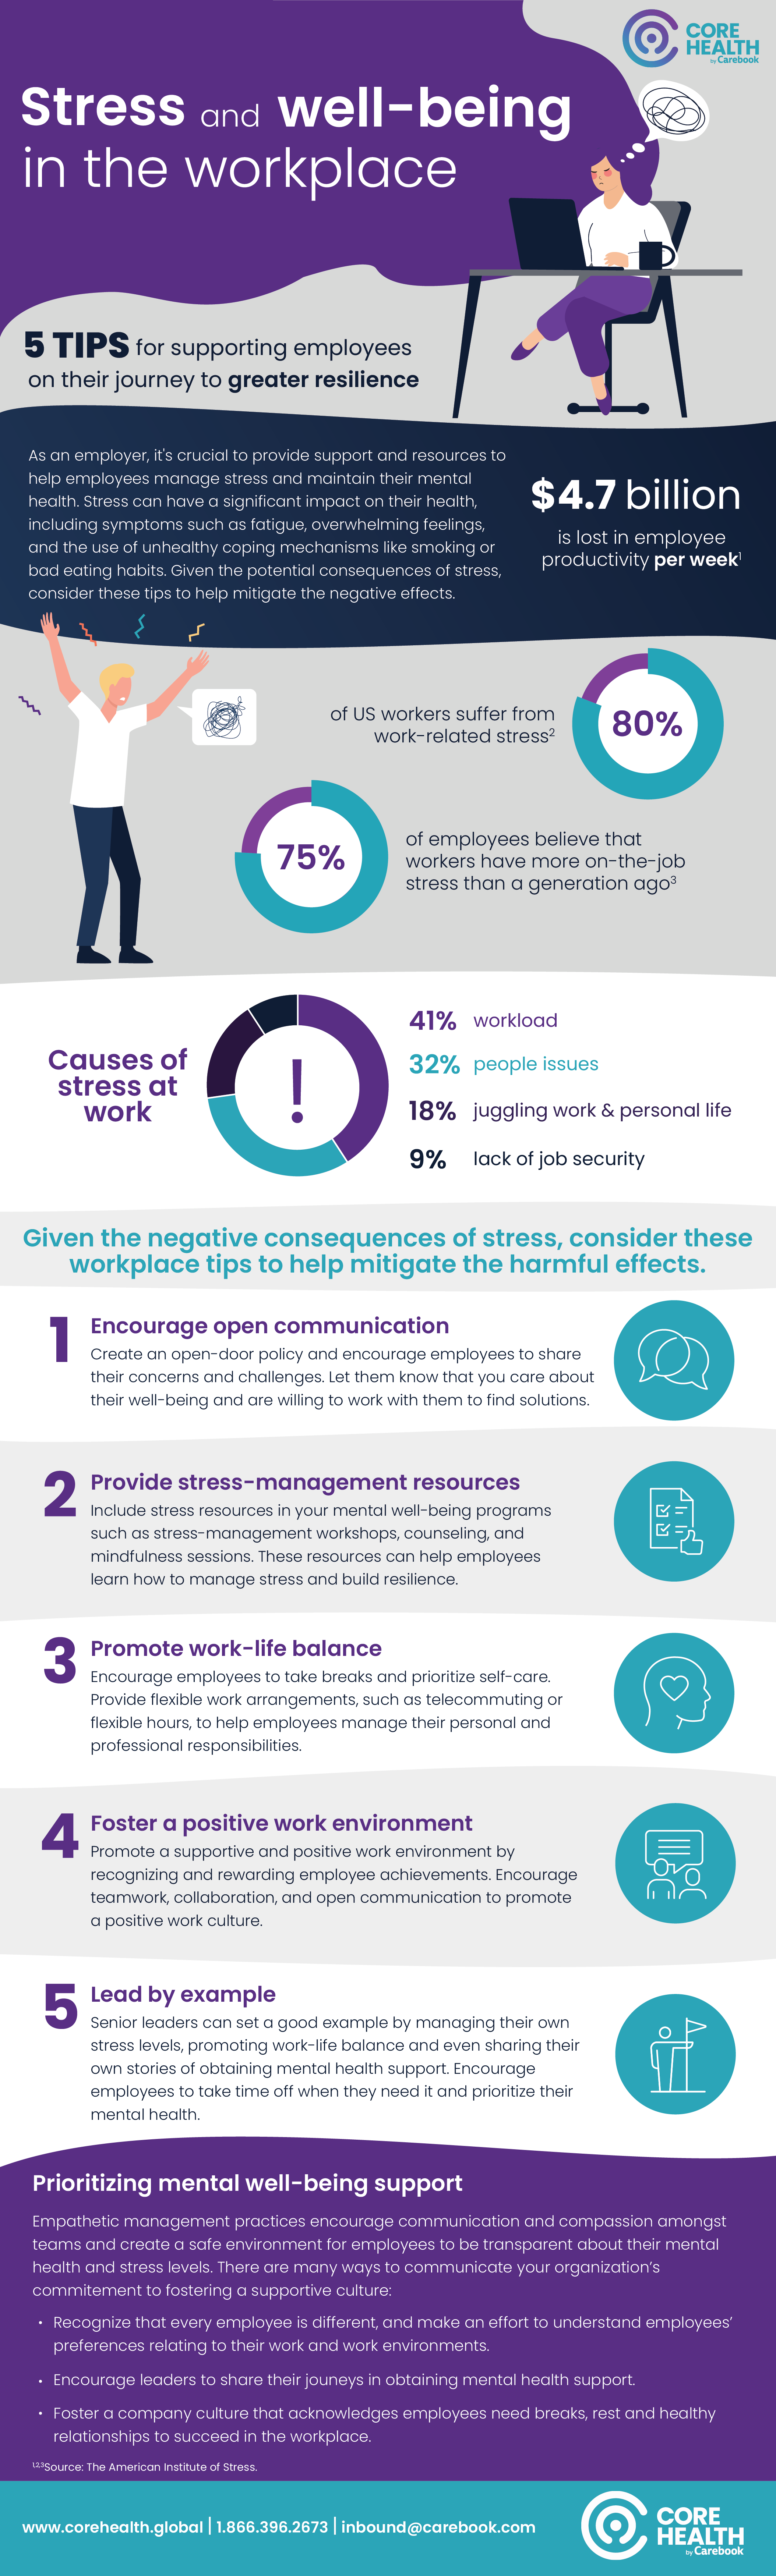 Stress and Well-being in the Workplace